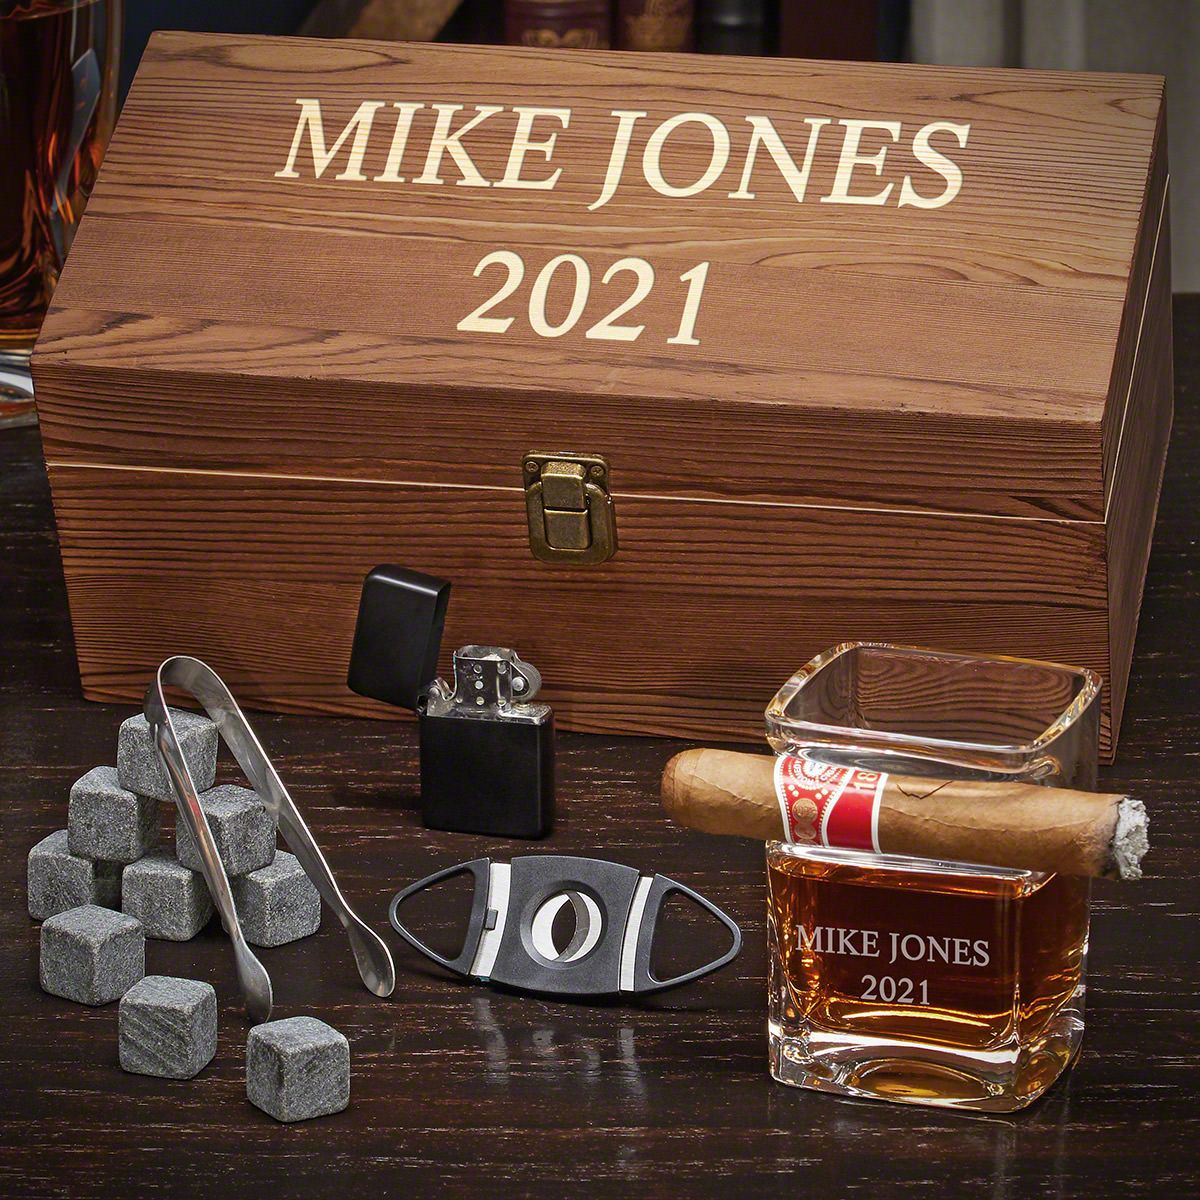 20th-anniversary gifts for husband #3: Beer gift set